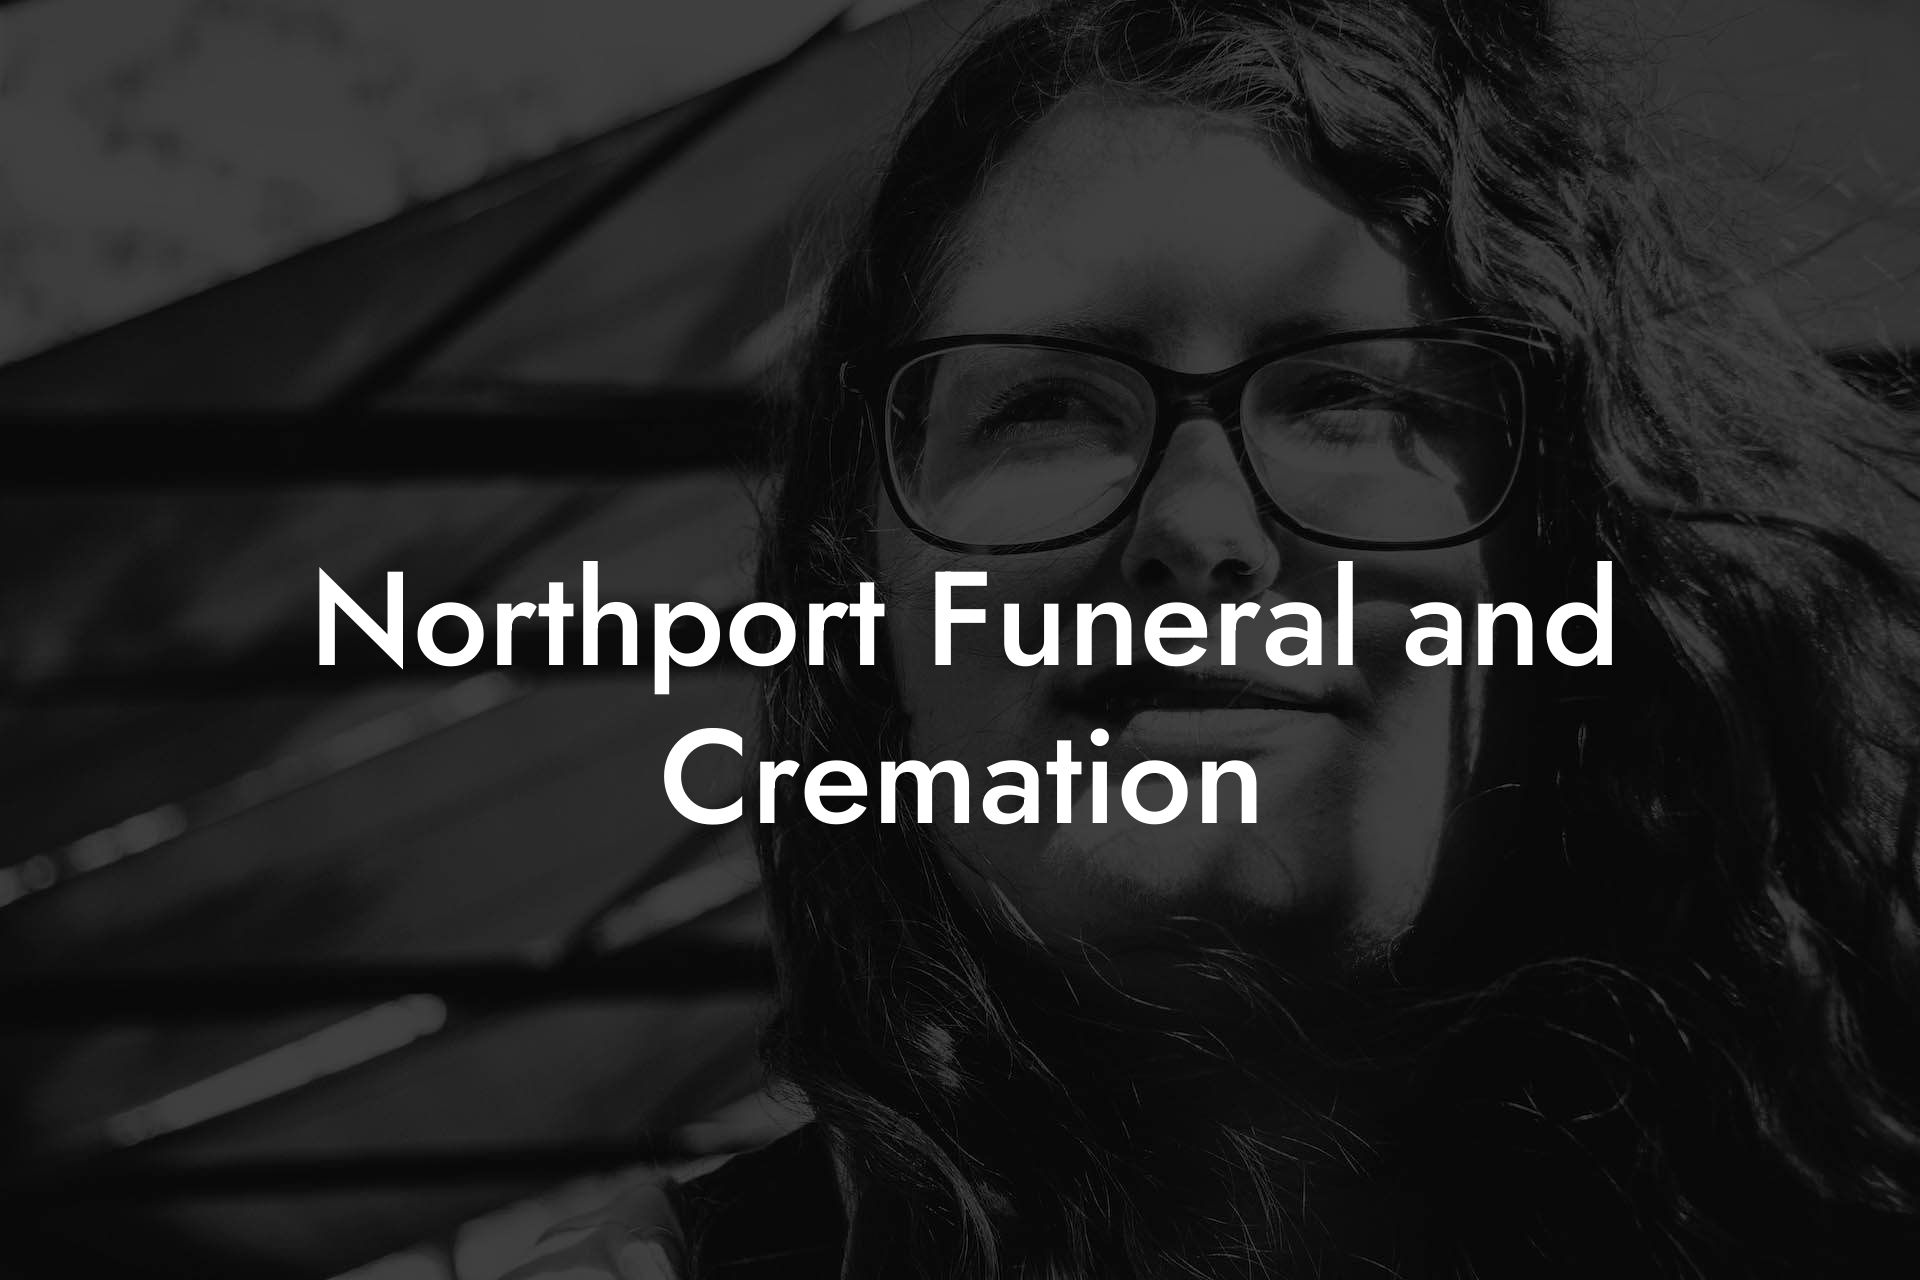 Northport Funeral and Cremation